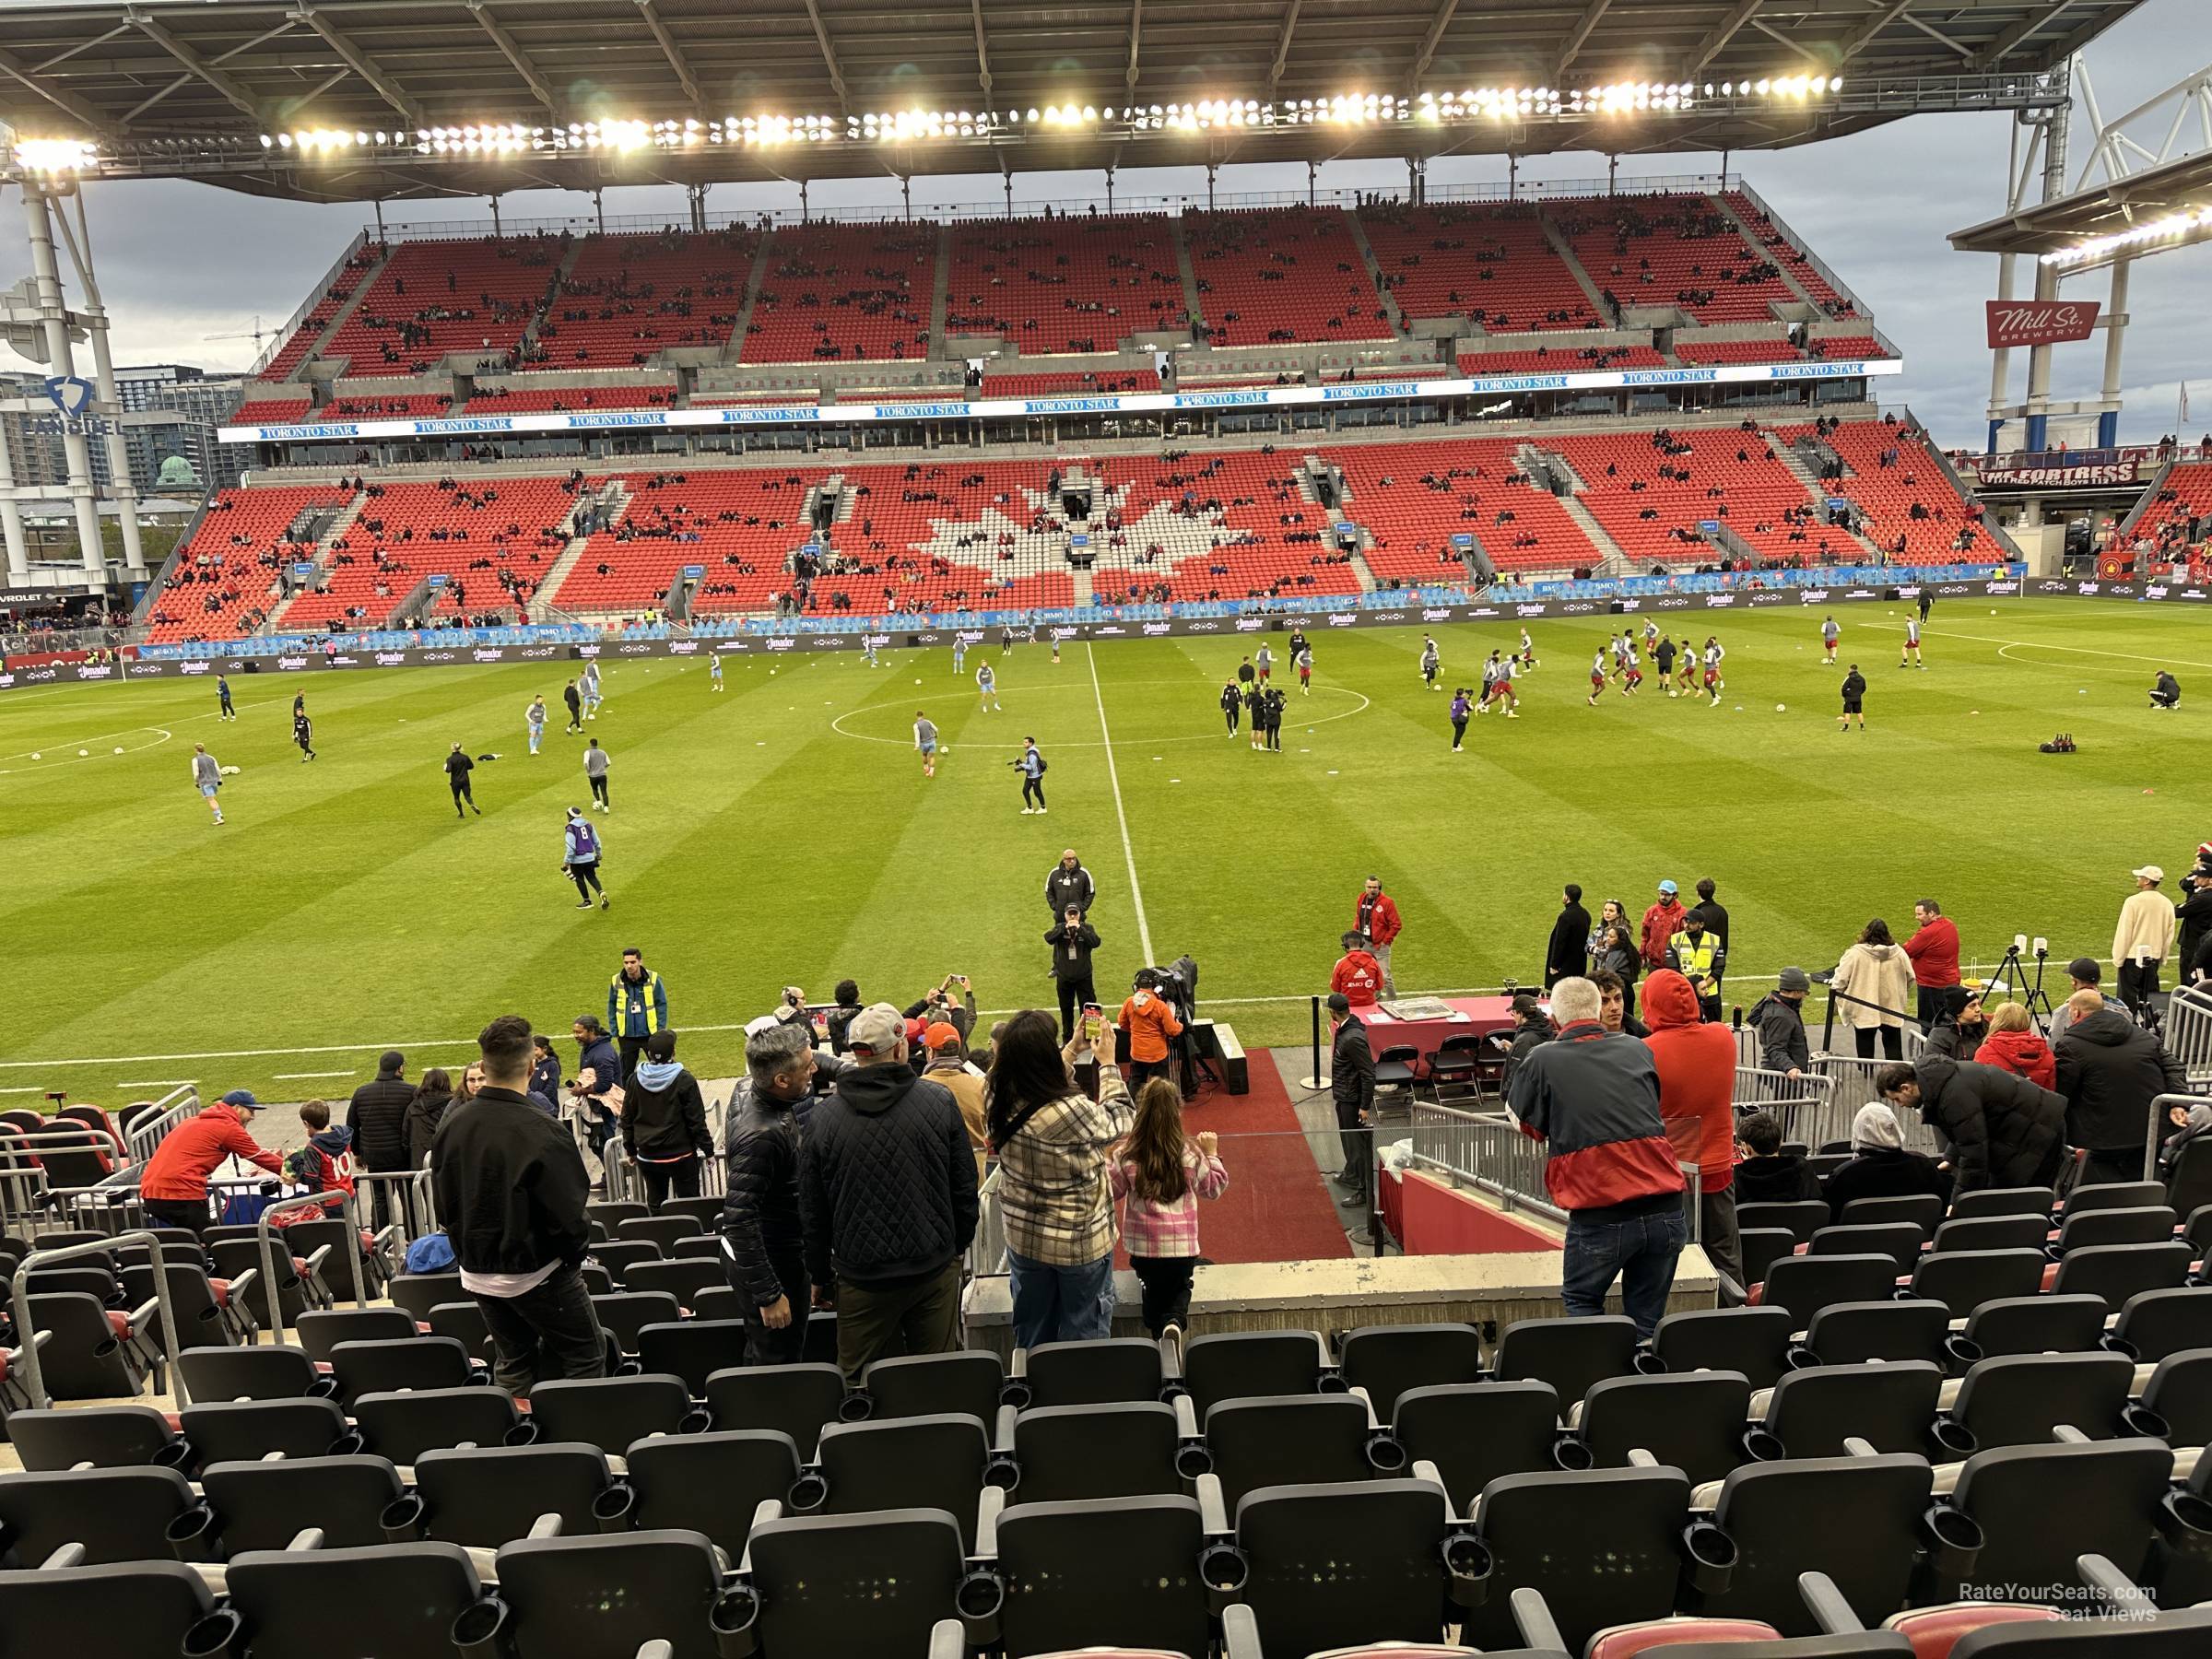 section 123, row 15 seat view  - bmo field